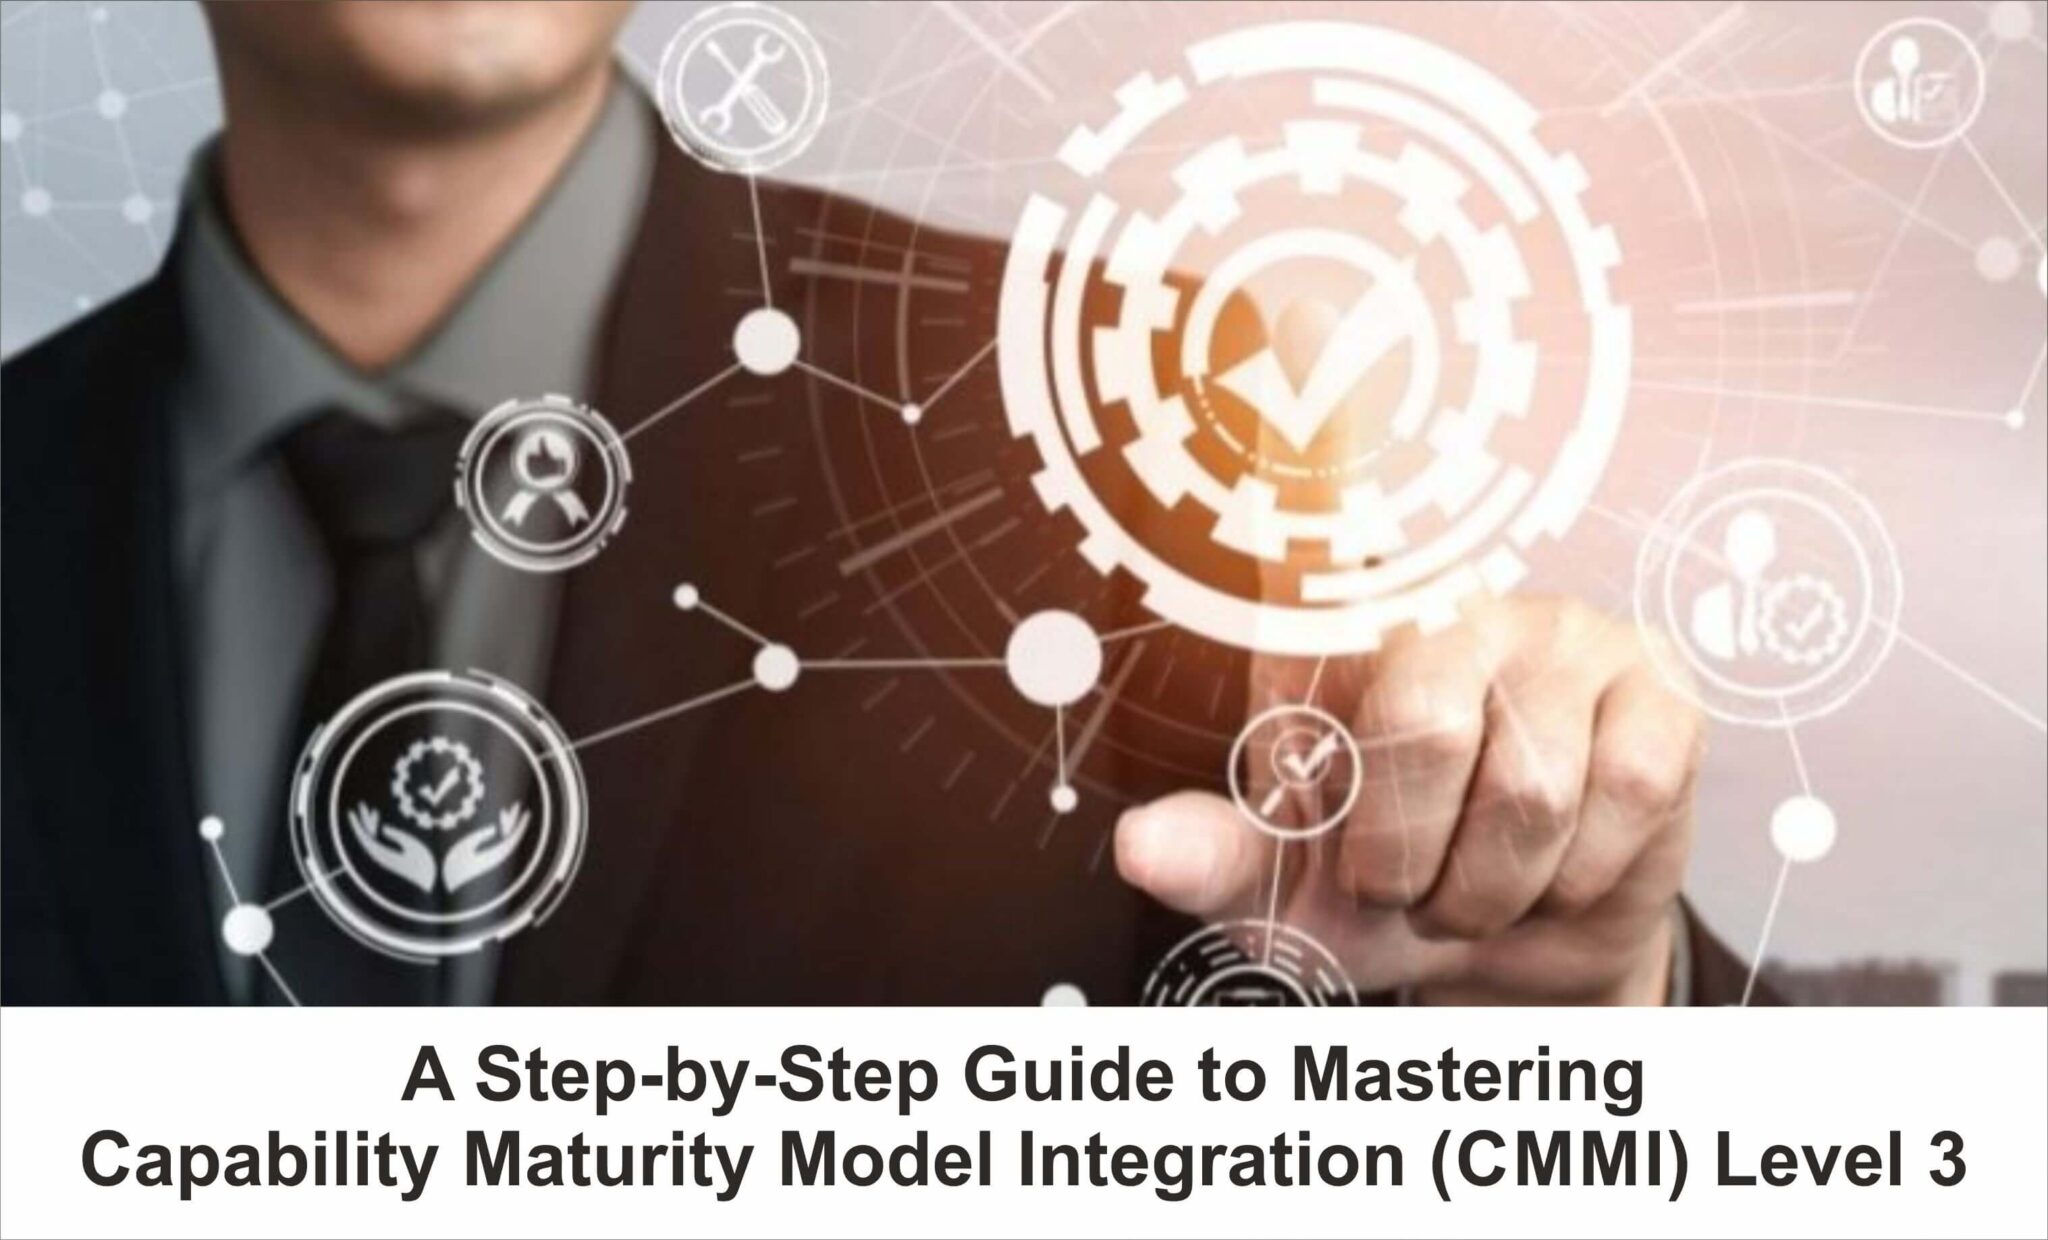 A-Step-by-Step-Guide-to-Mastering-Capability-Maturity-Model-Integration-CMMI-Level-3-2048x1240